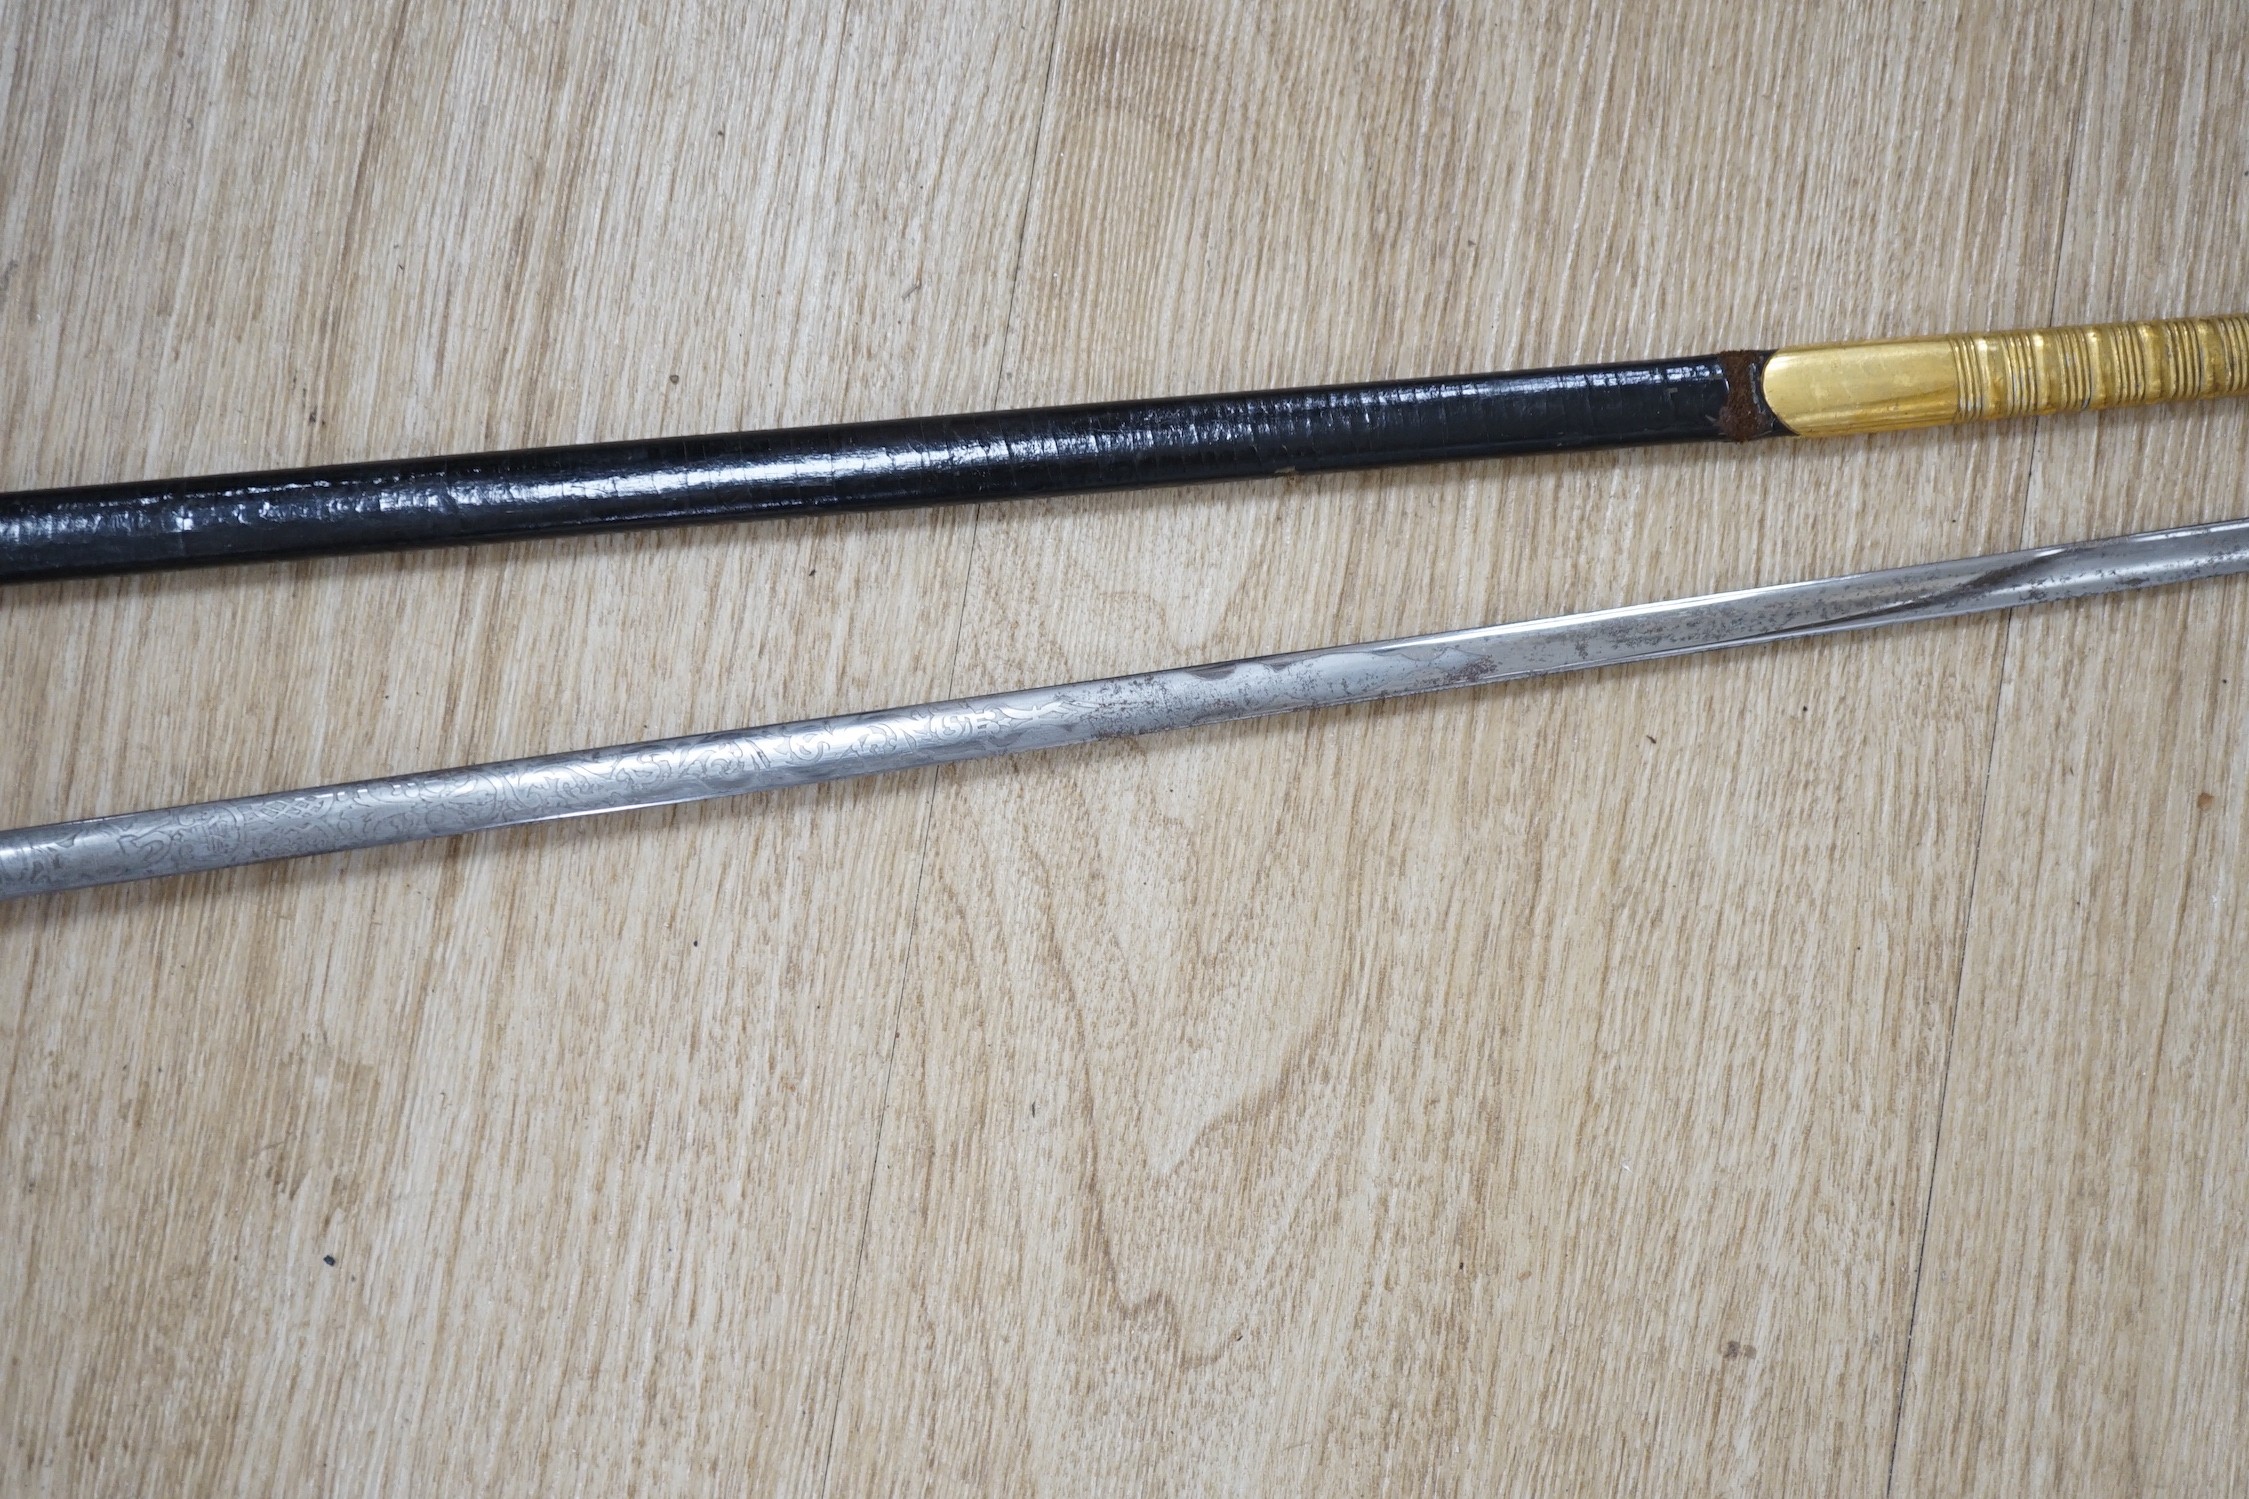 A 19th century officer's dress sword, made by Silver &Co. London with scabbard and leather cover - Image 4 of 5